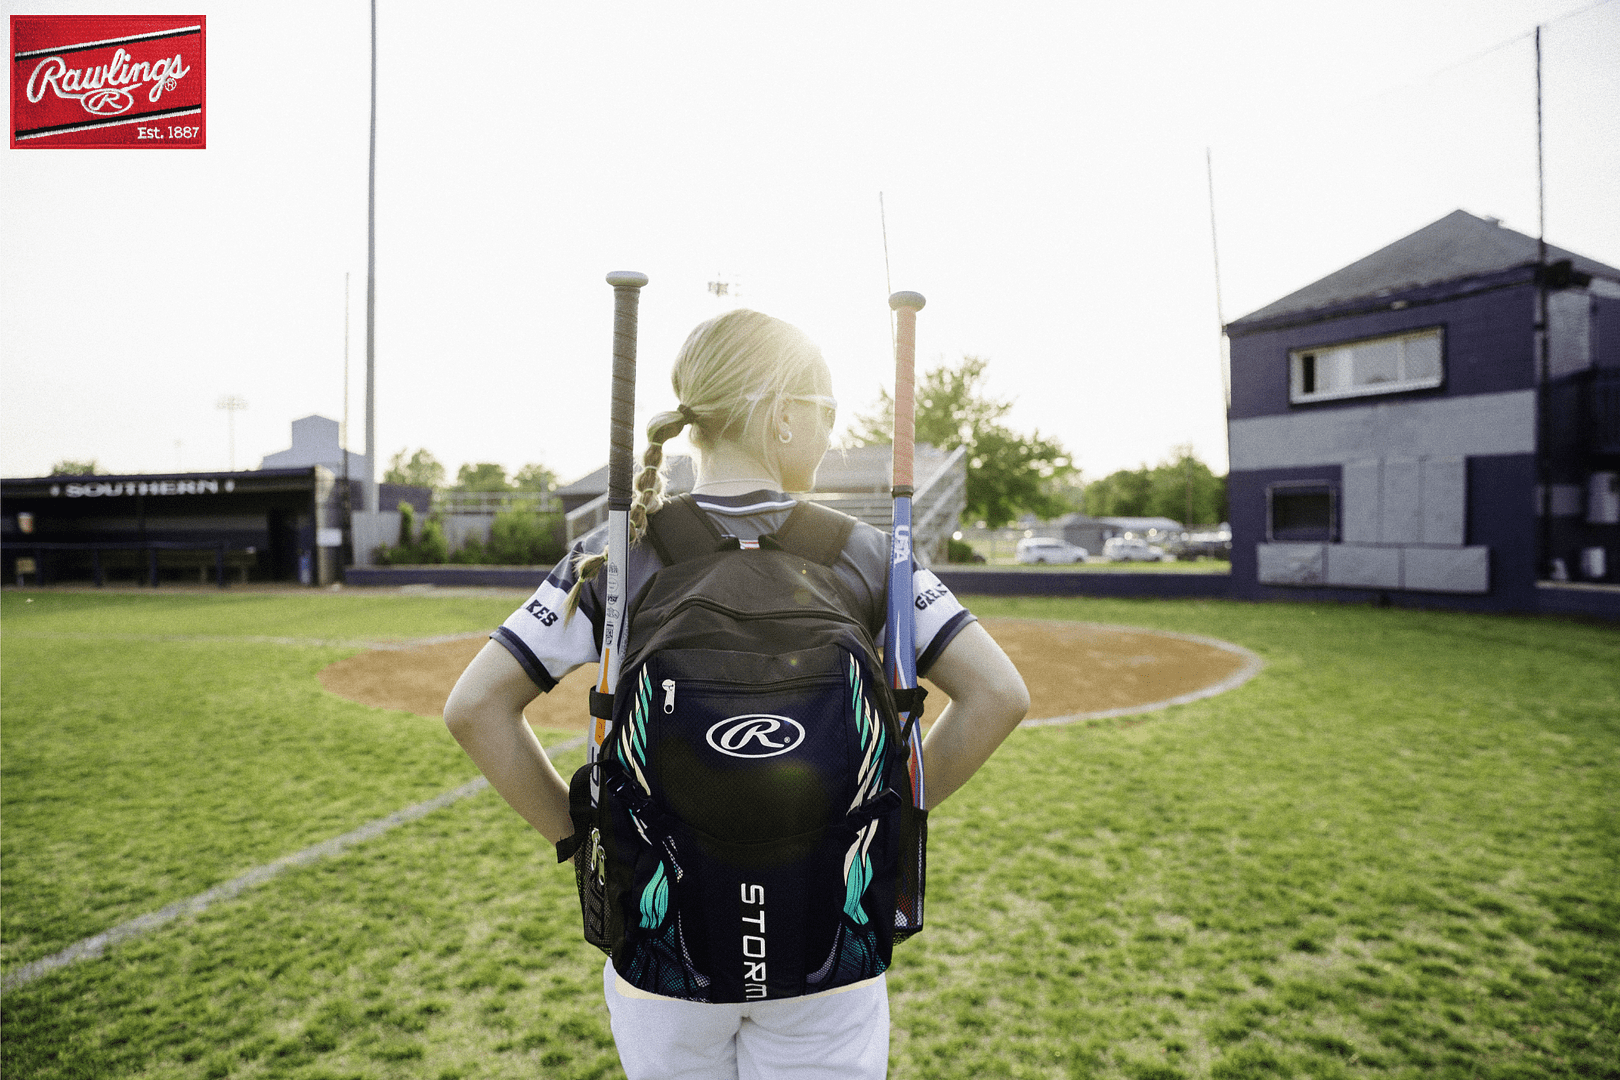 Rawlings Storm Girls Softball Bag, Black/Mint - Available in 3 Colors